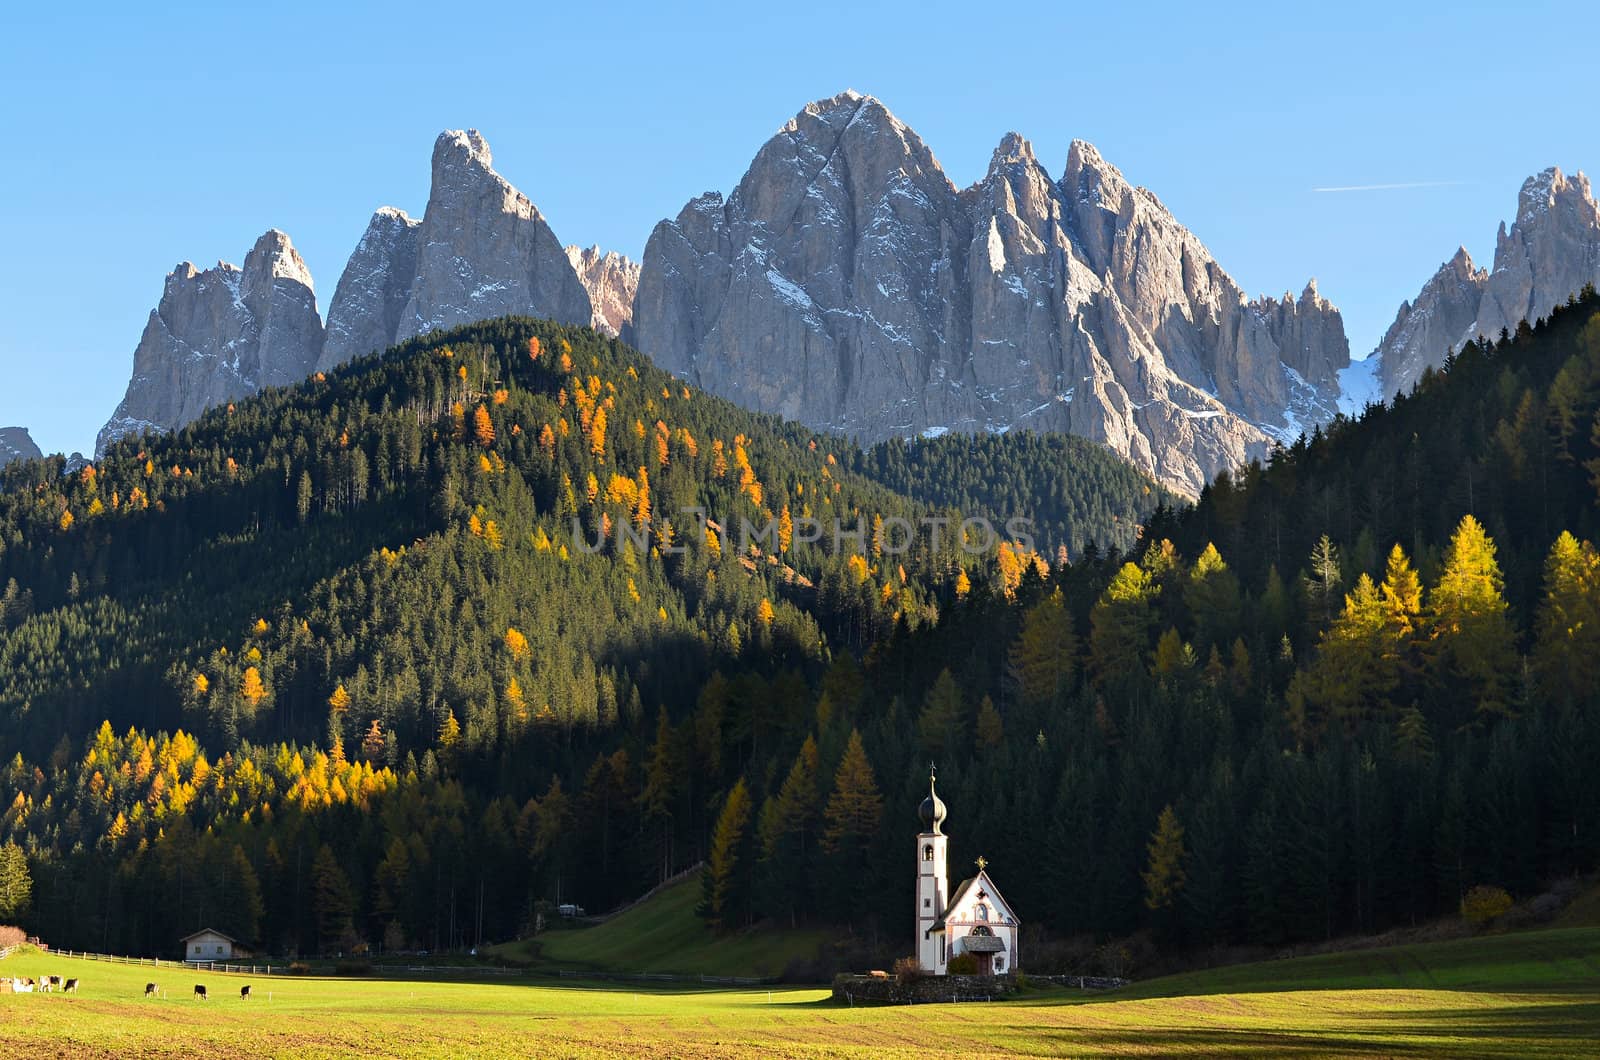 The famous church of San Giovanni in Ranui (Sankt Johann) in front of the Geisler or Odle dolomites mountain peaks in Santa Maddalena (Sankt Magdalena) in the Val di Funes in Italy.